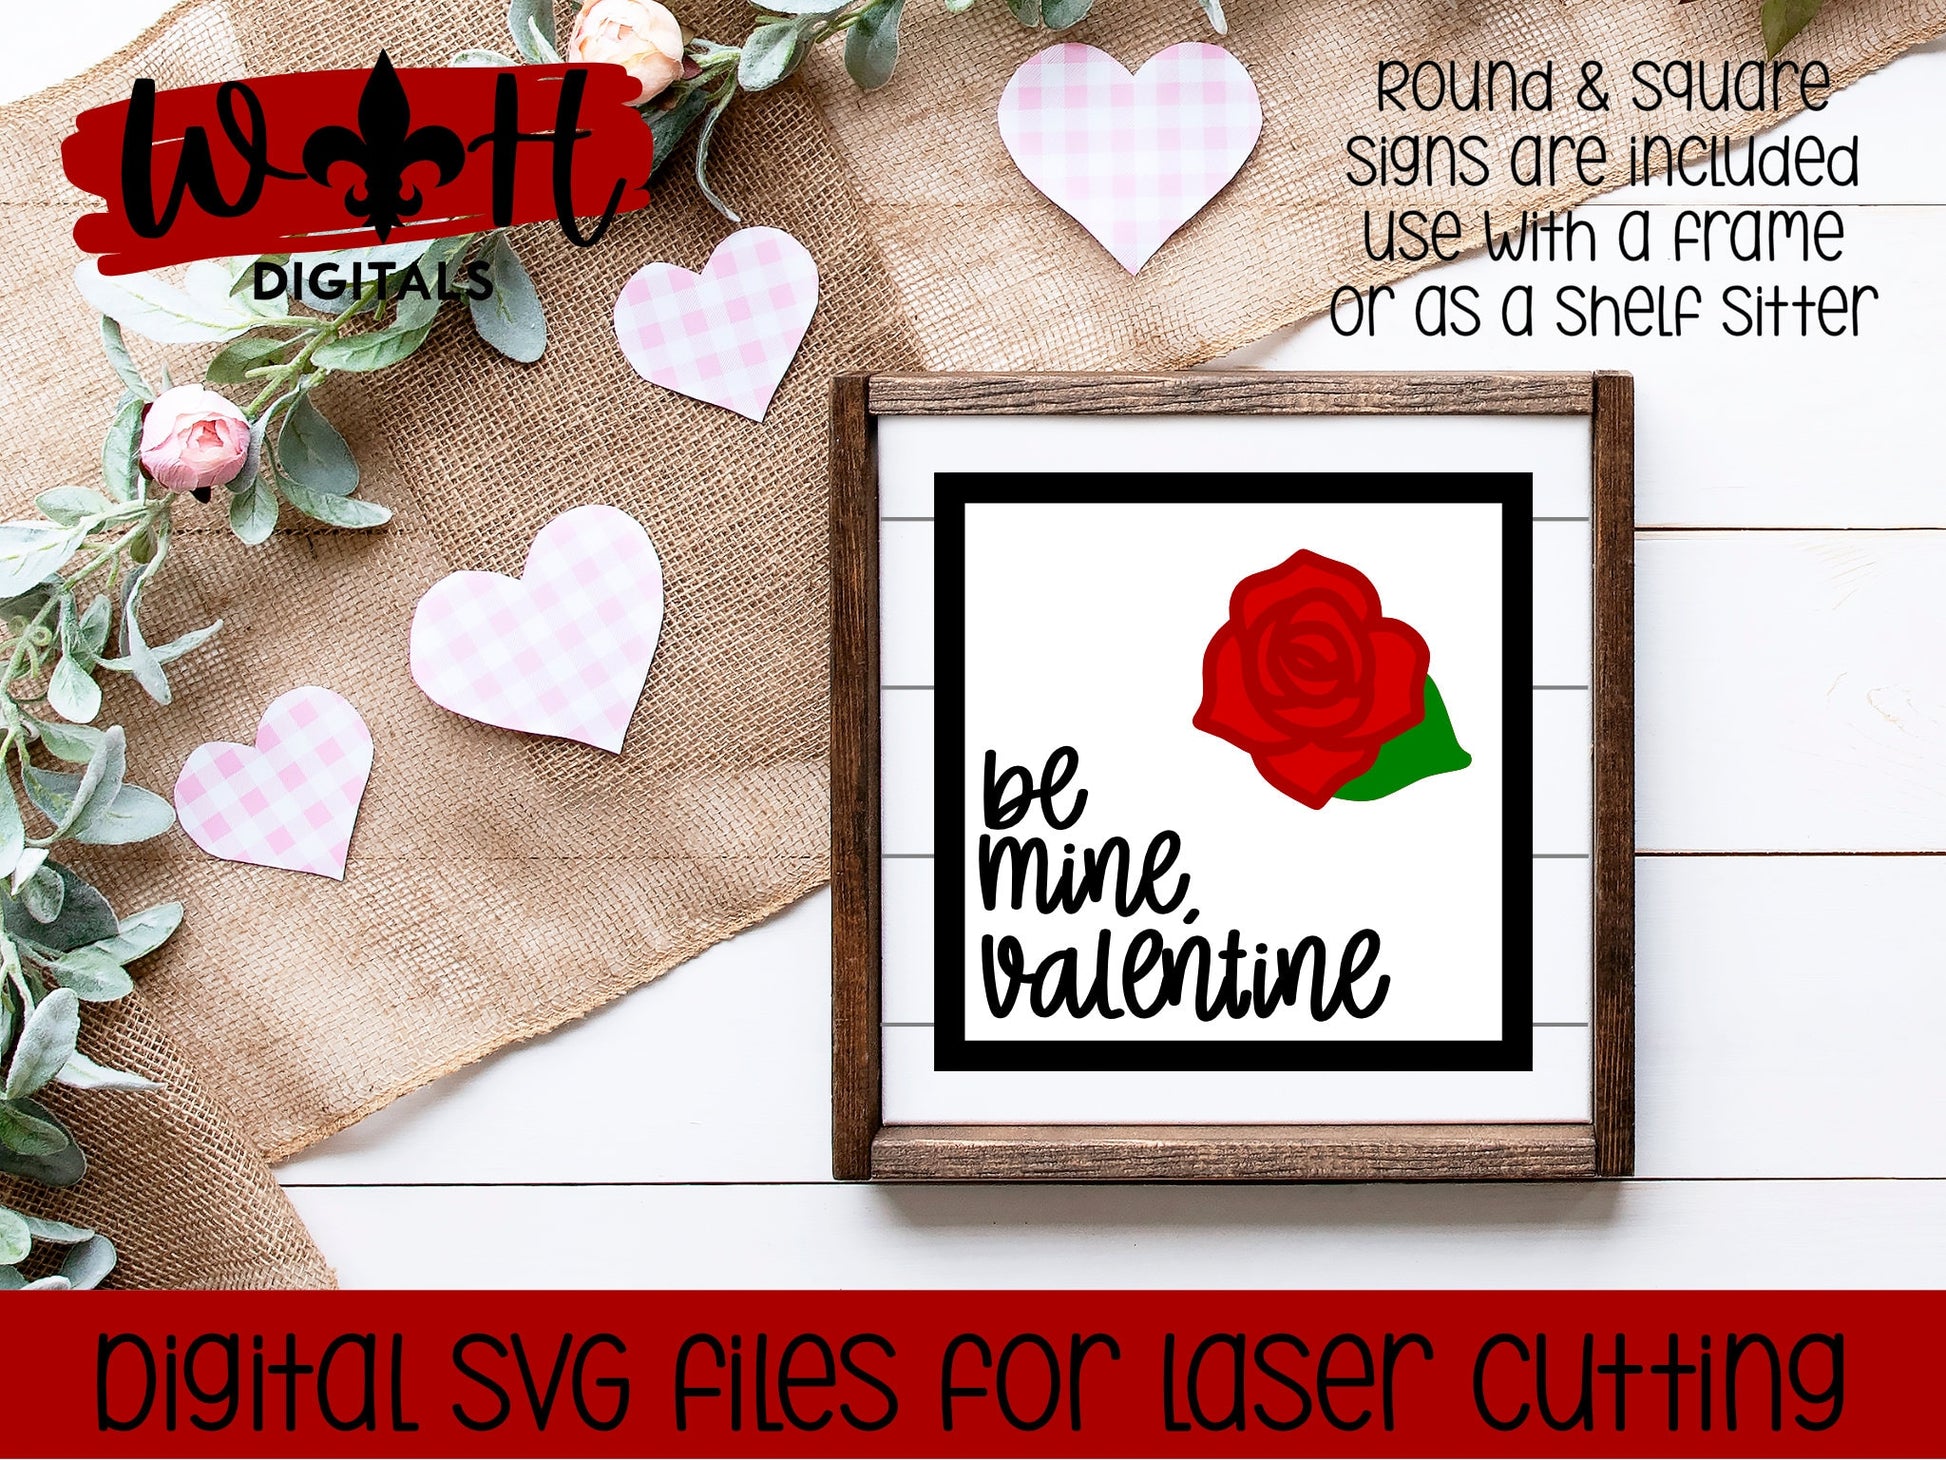 Be Mine Valentine's Day Rose - Shiplap Shelf Sitter - Round and Square - Files for Sign Making - SVG Cut File For Glowforge - Digital File